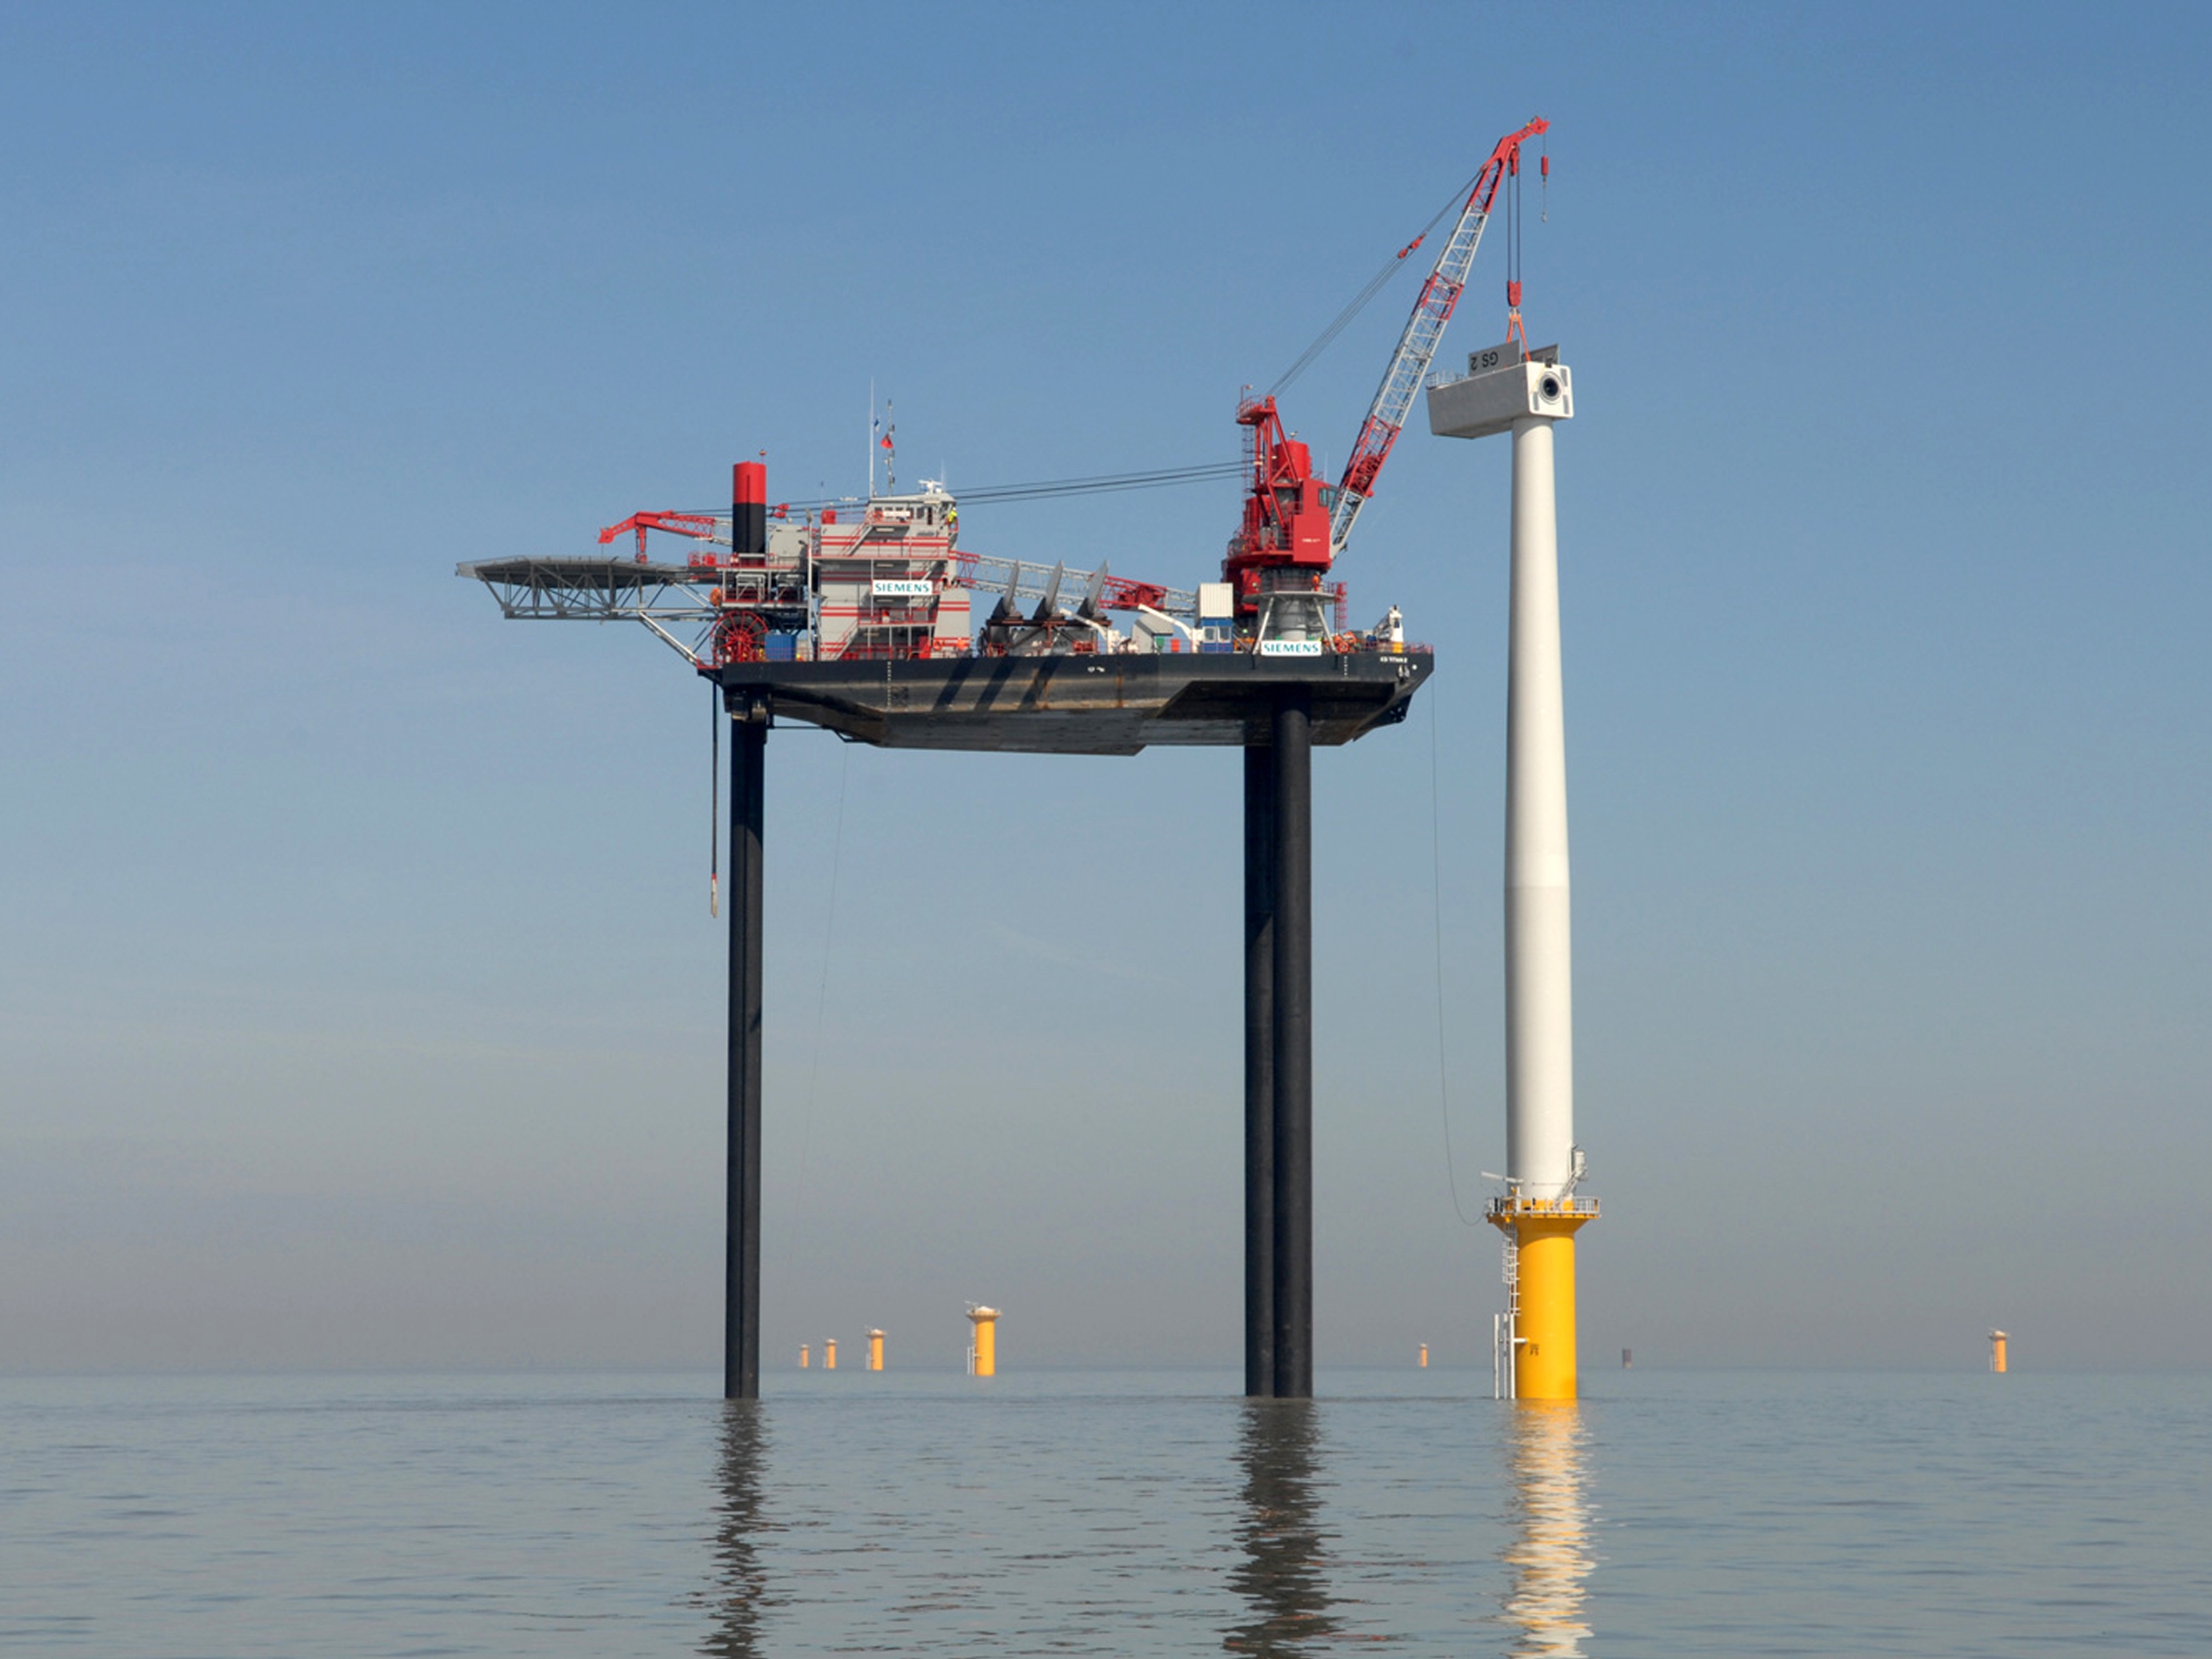 RenewableUK on Galloper OWF: Getting Projects Actually Built Can’t Be Taken for Granted